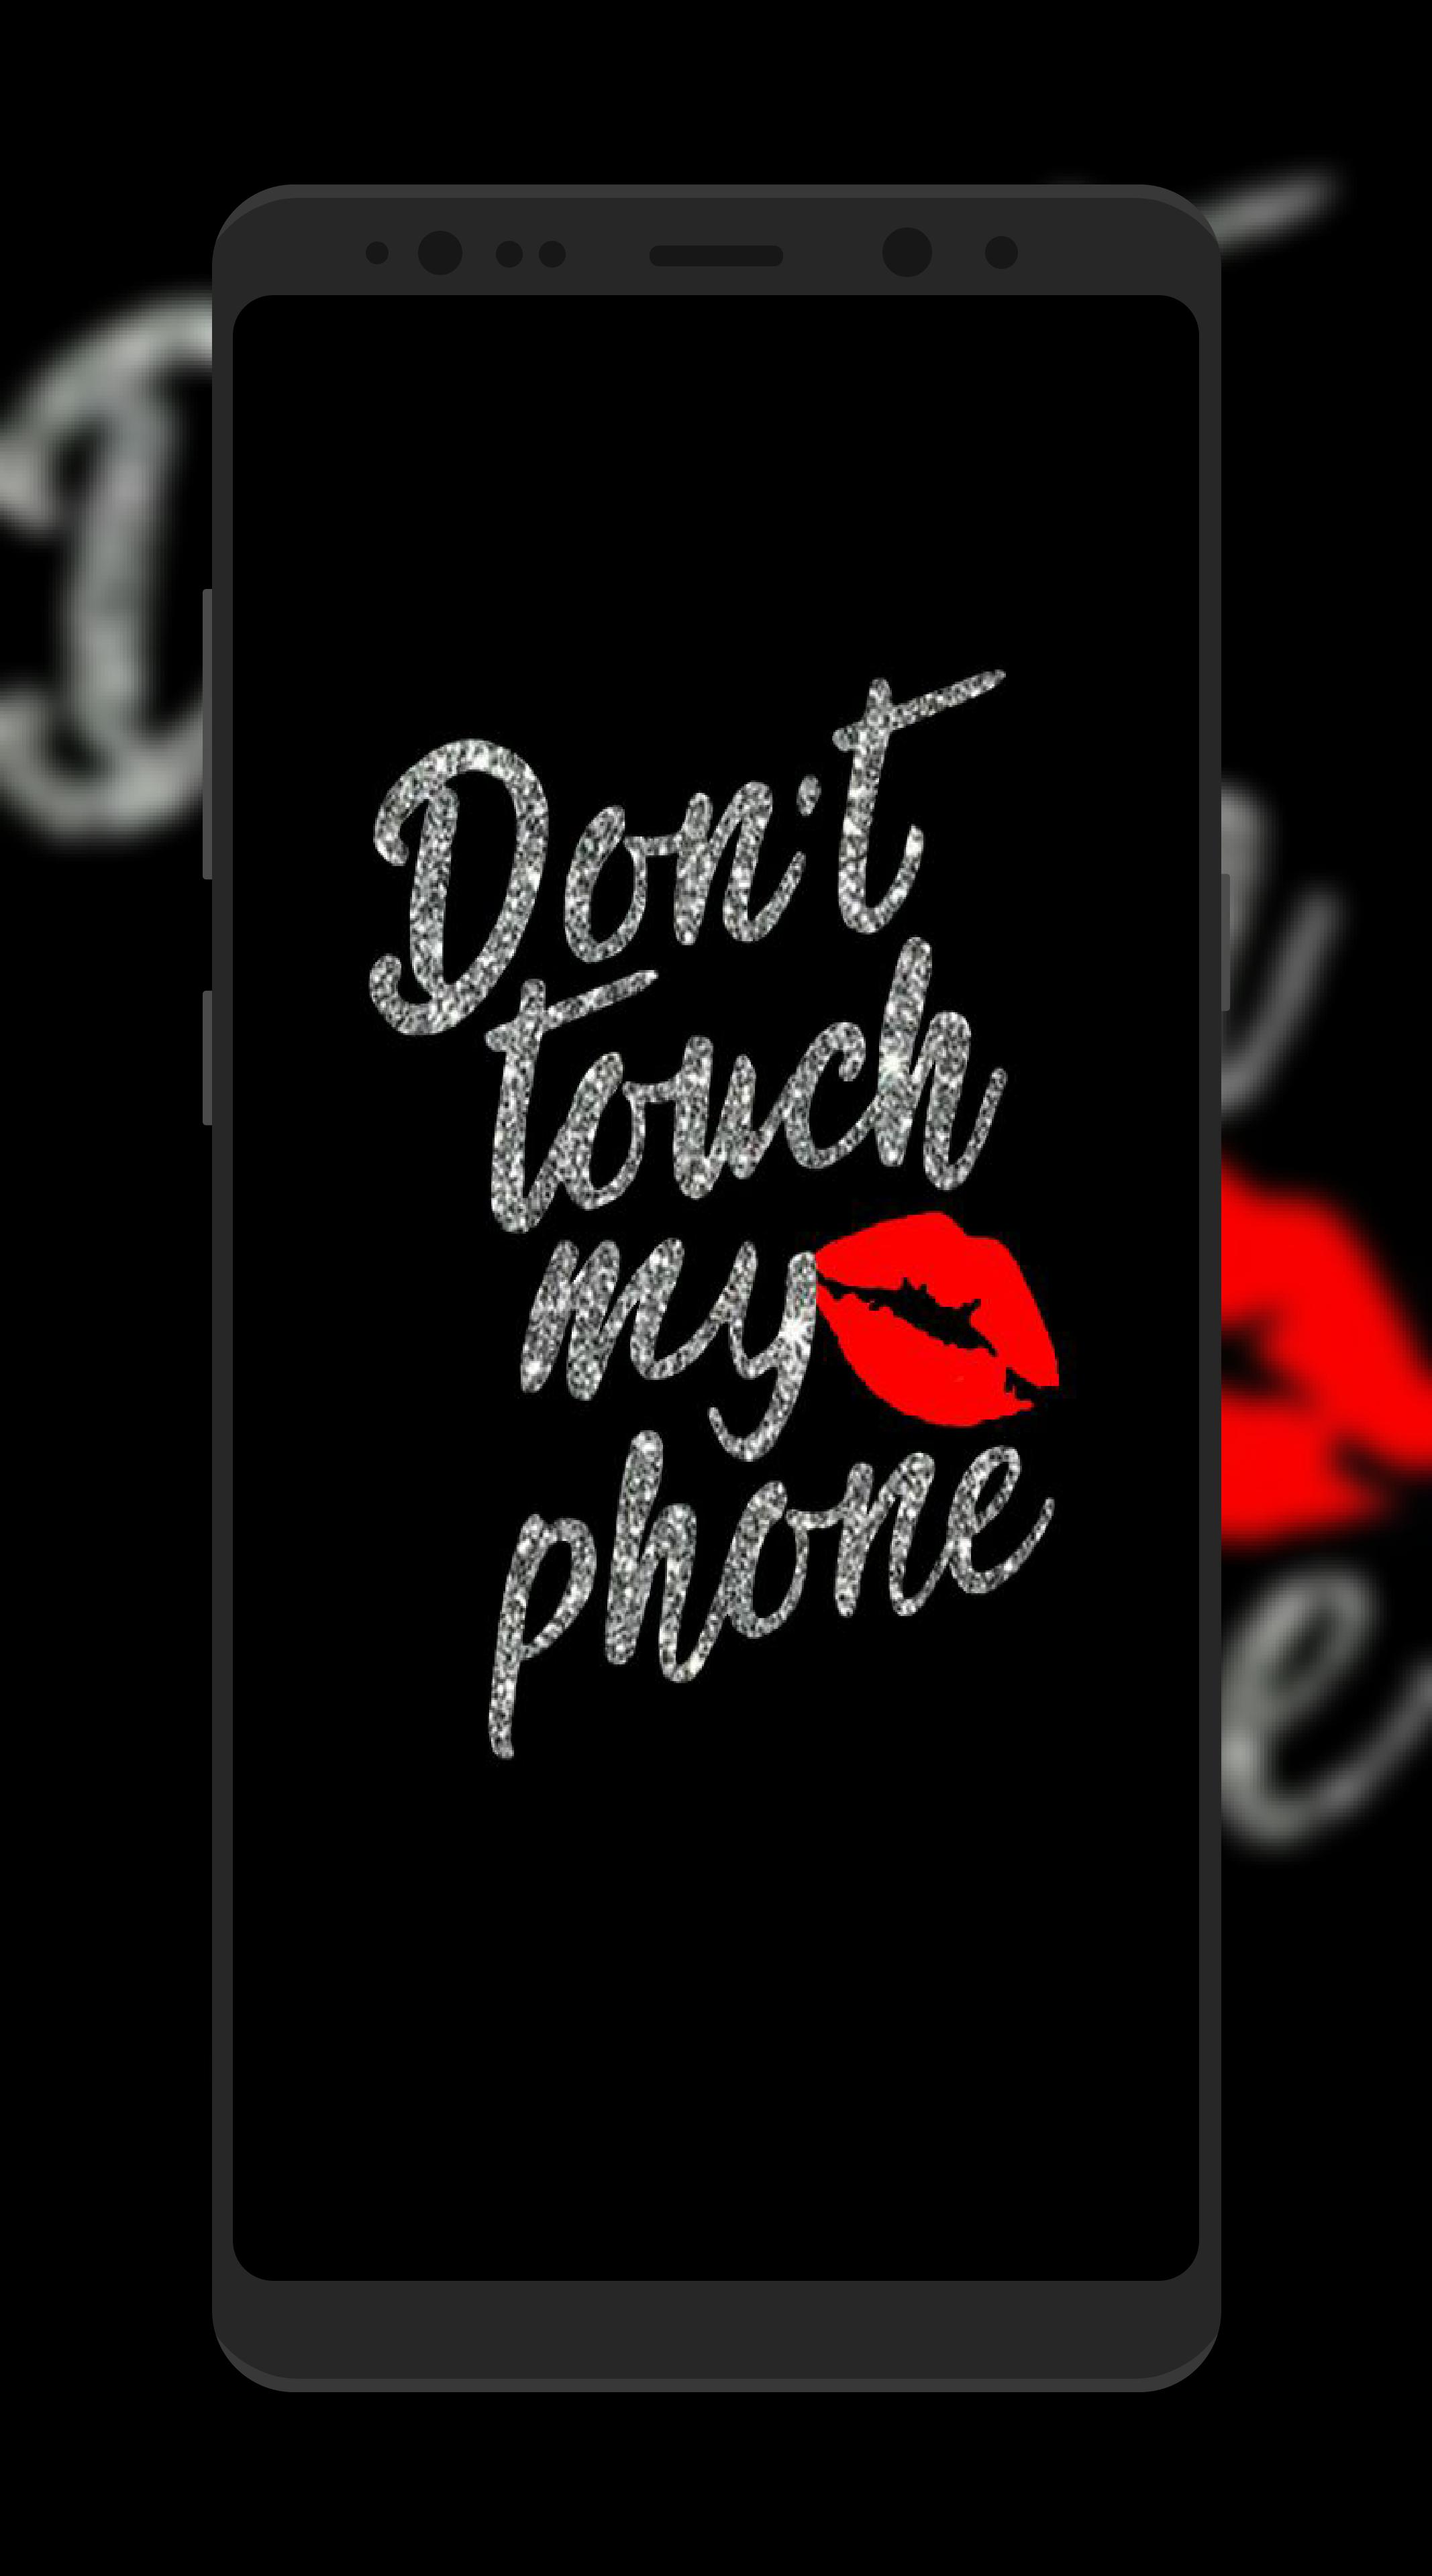  Don t  Touch  My  Phone  Wallpapers  for Android APK Download